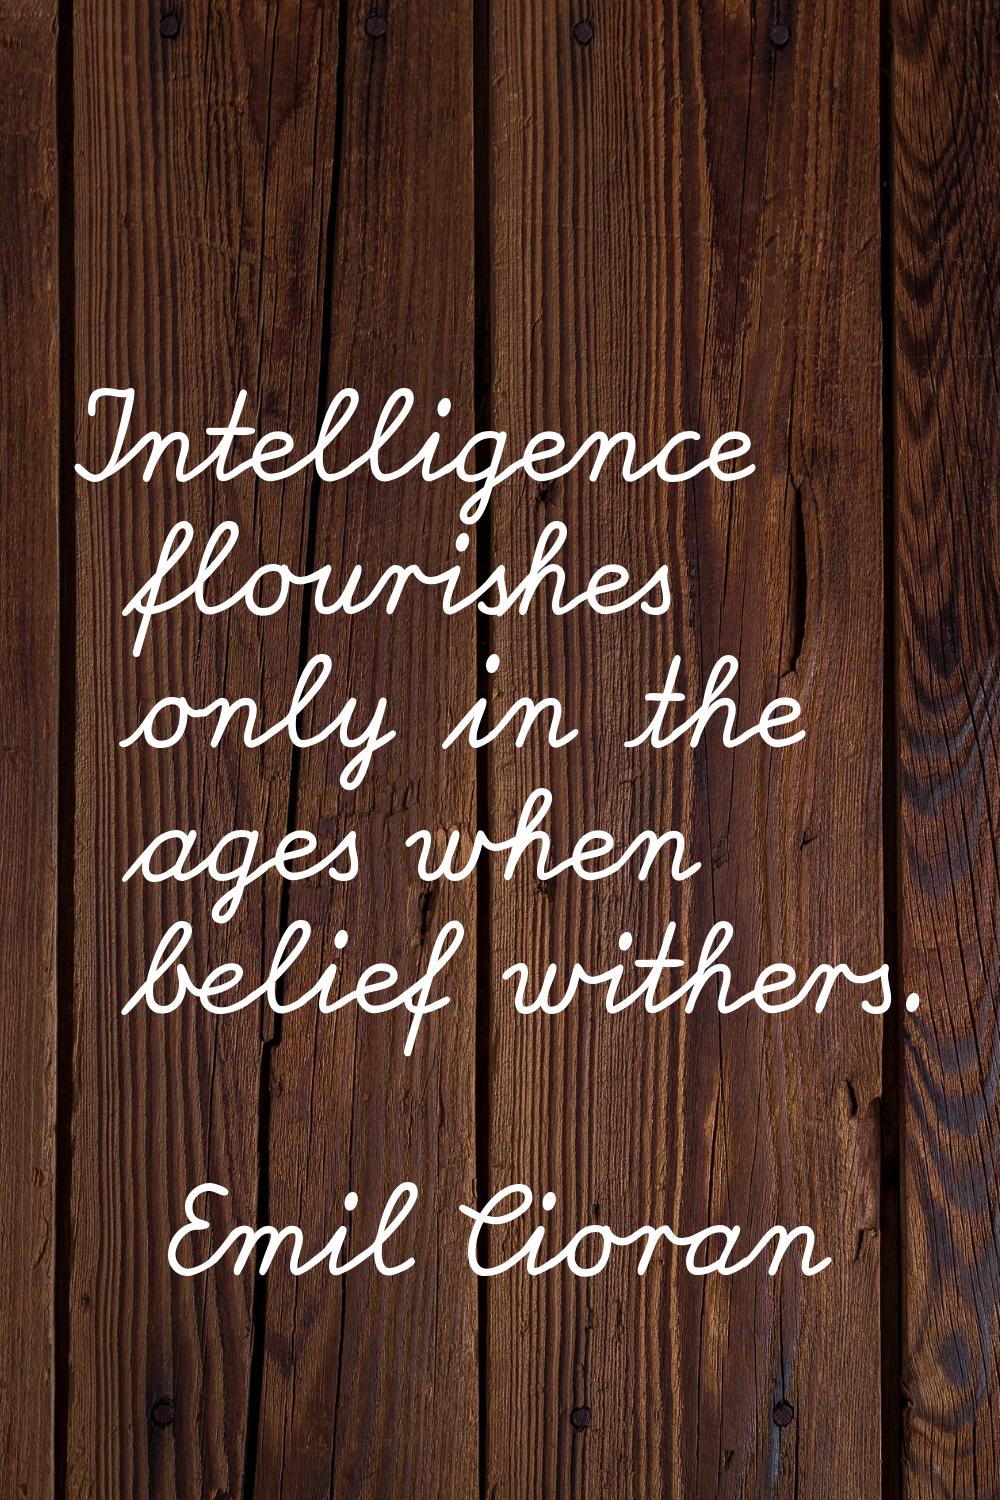 Intelligence flourishes only in the ages when belief withers.